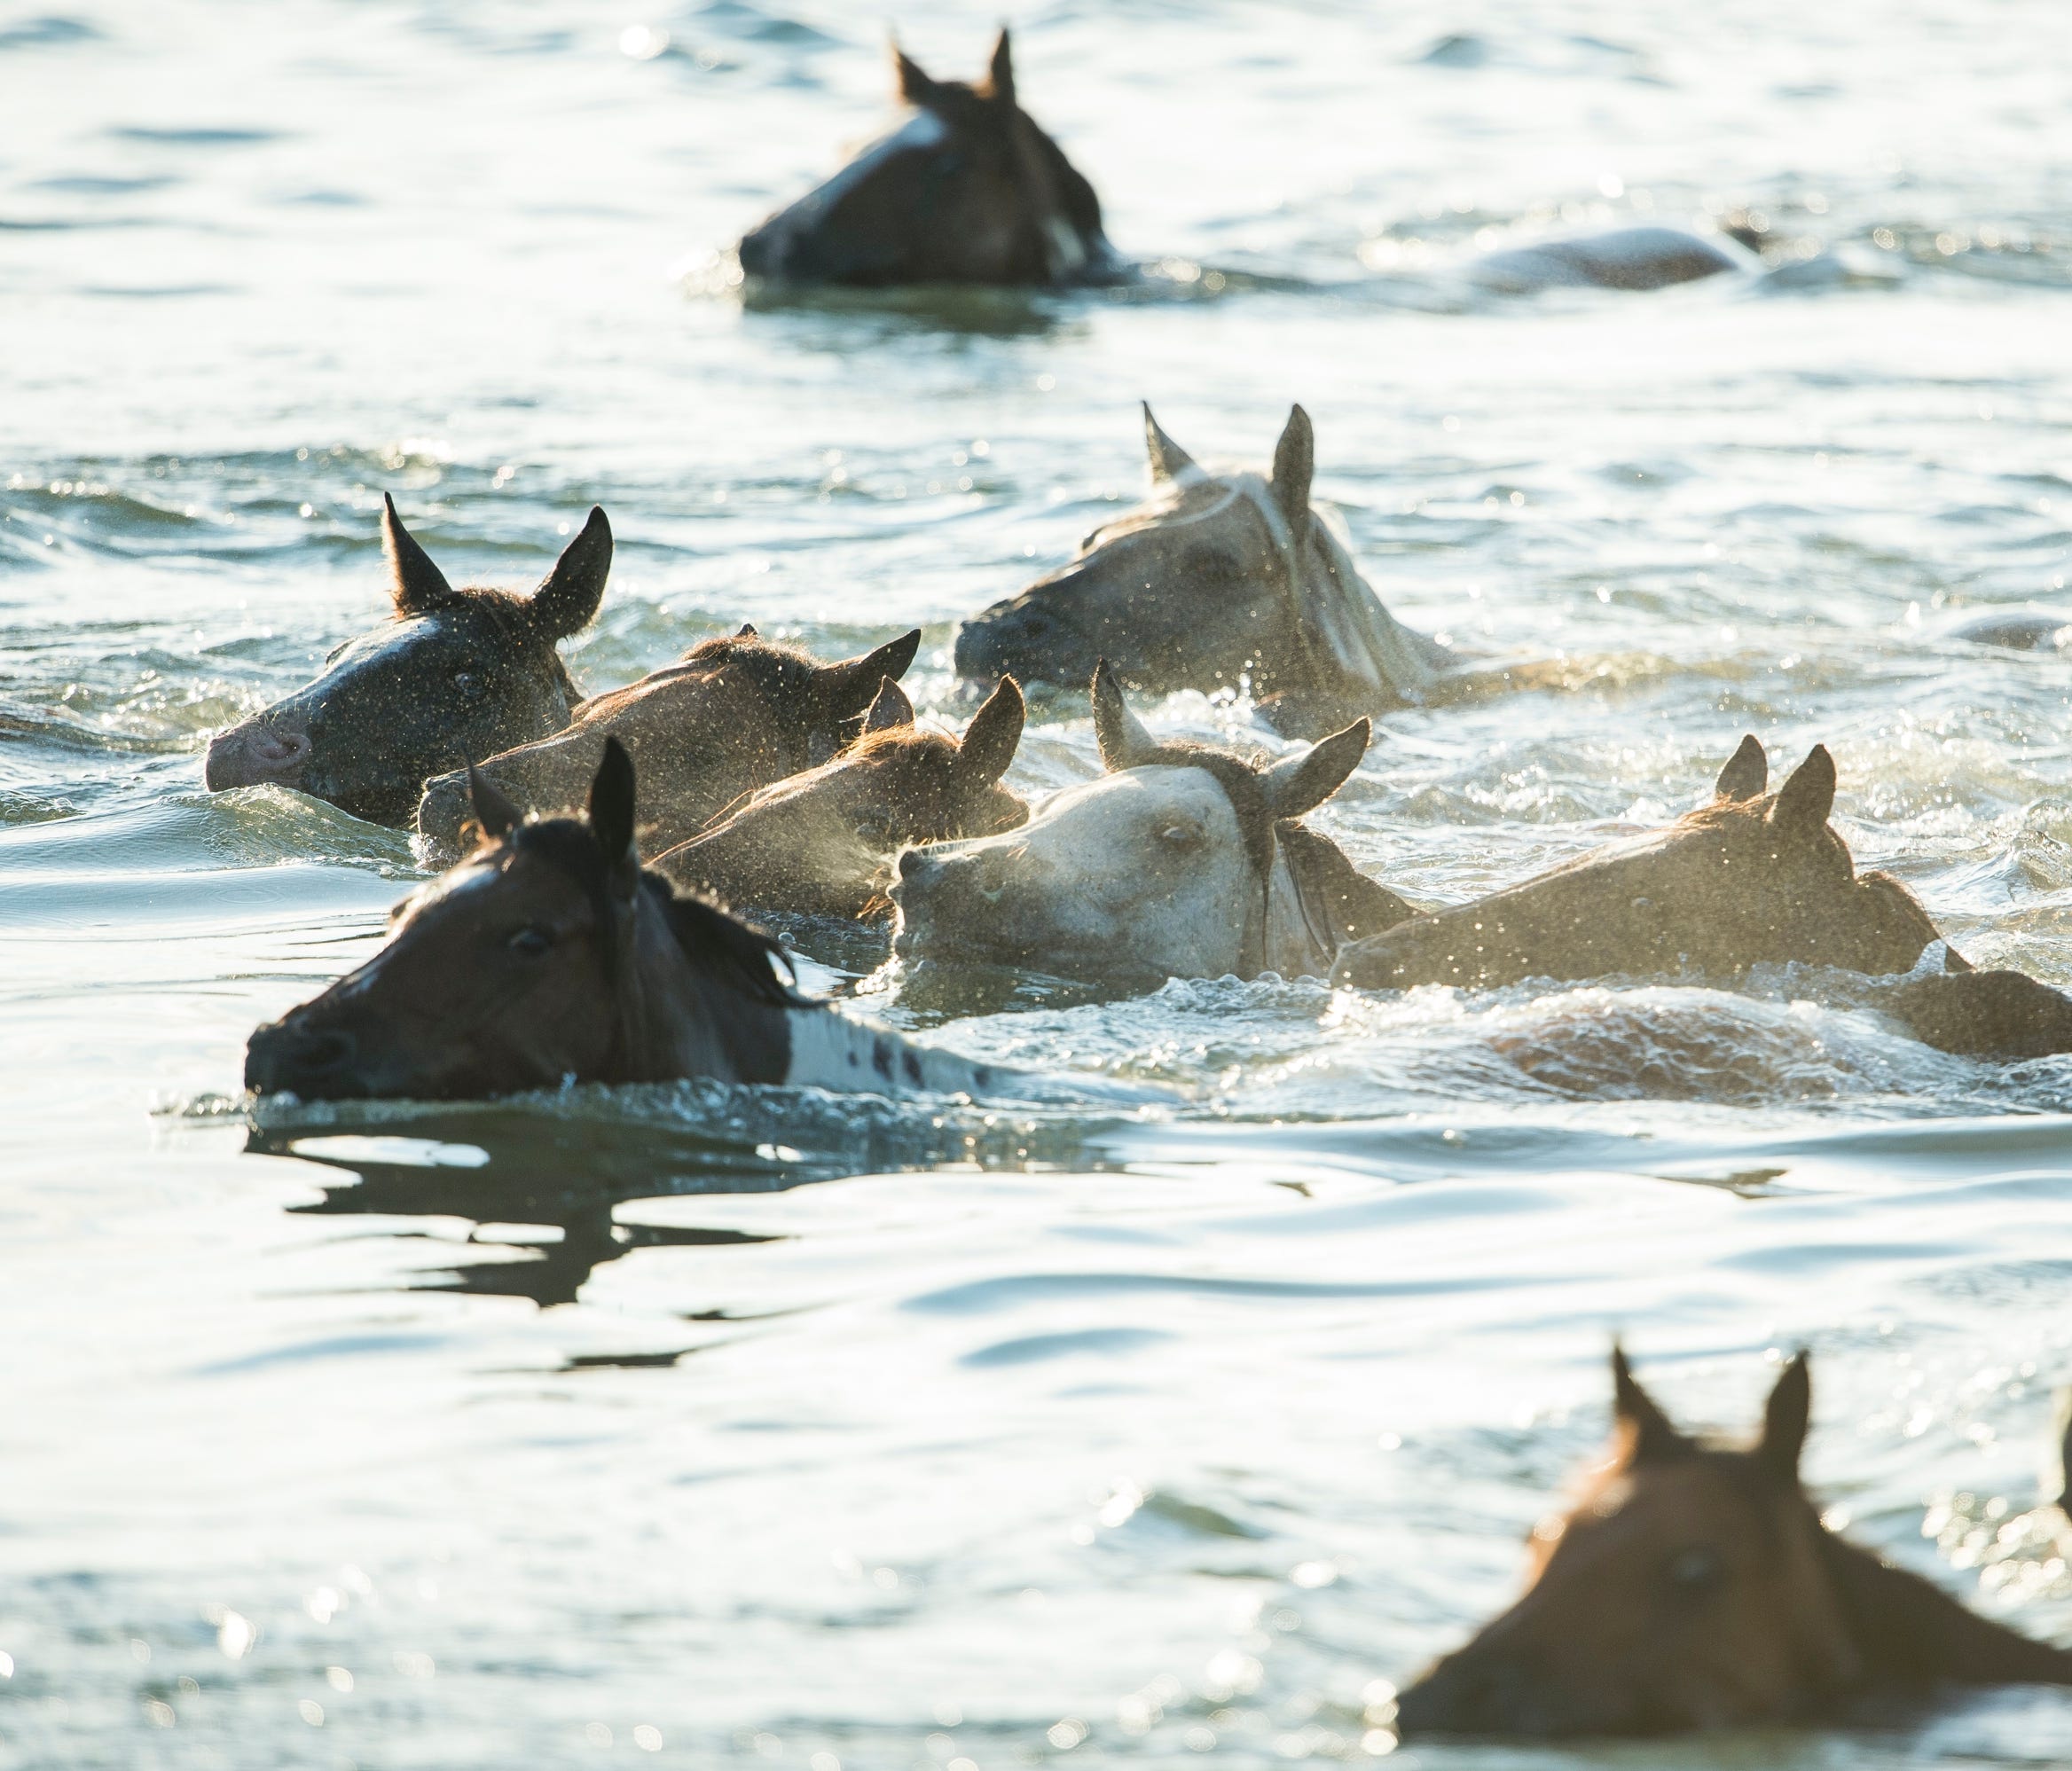 Wild ponies make their swim to on Chincoteague Island in Chincoteague, VA on July 26, 2017. Every year a group of 